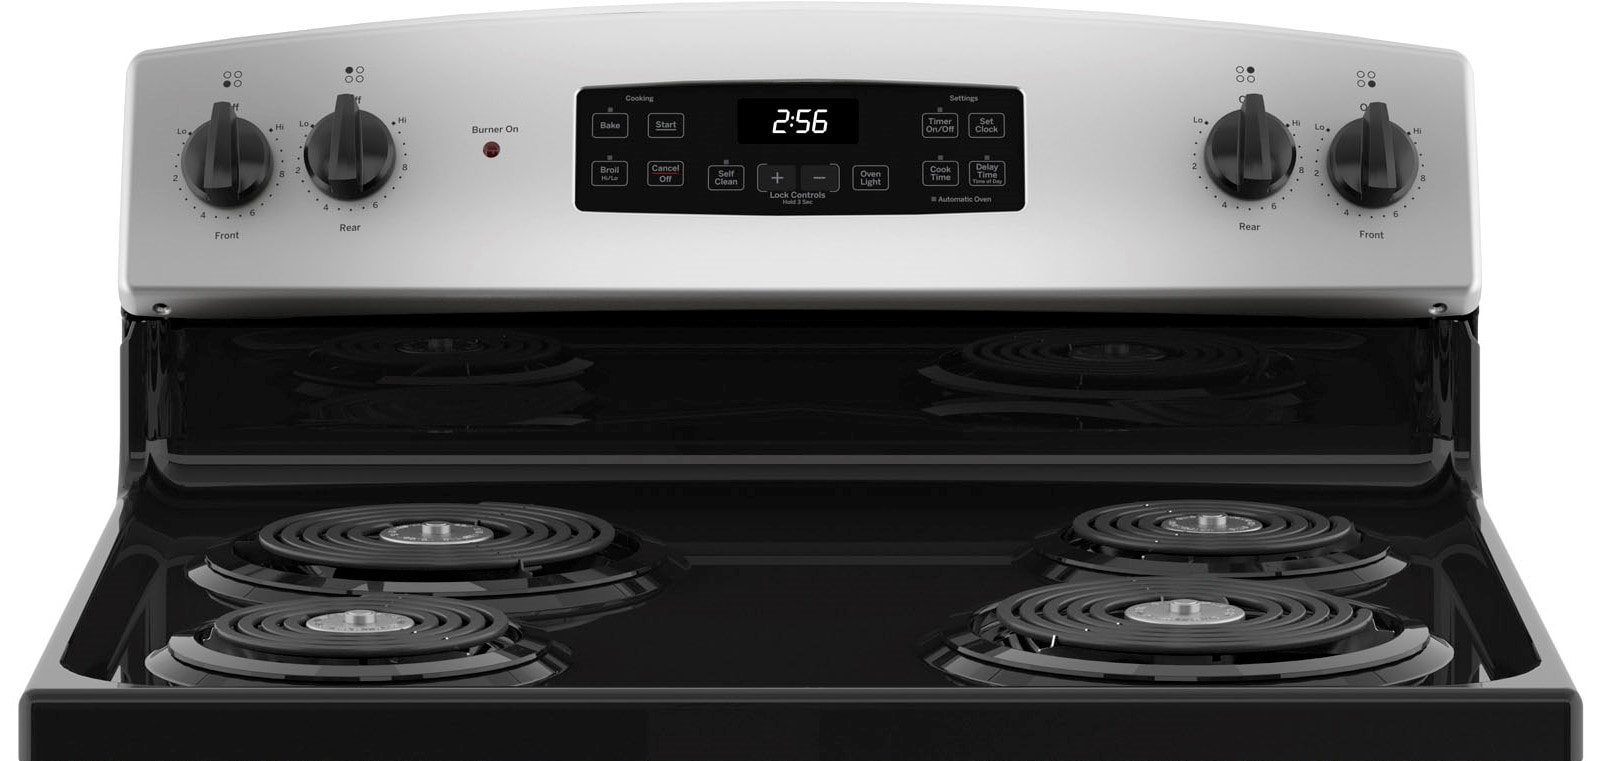 JB256RTSS GE ®30 Free-Standing Self-Clean Electric Range STAINLESS  STEEL/BLACK - C & C Audio Video and Appliance